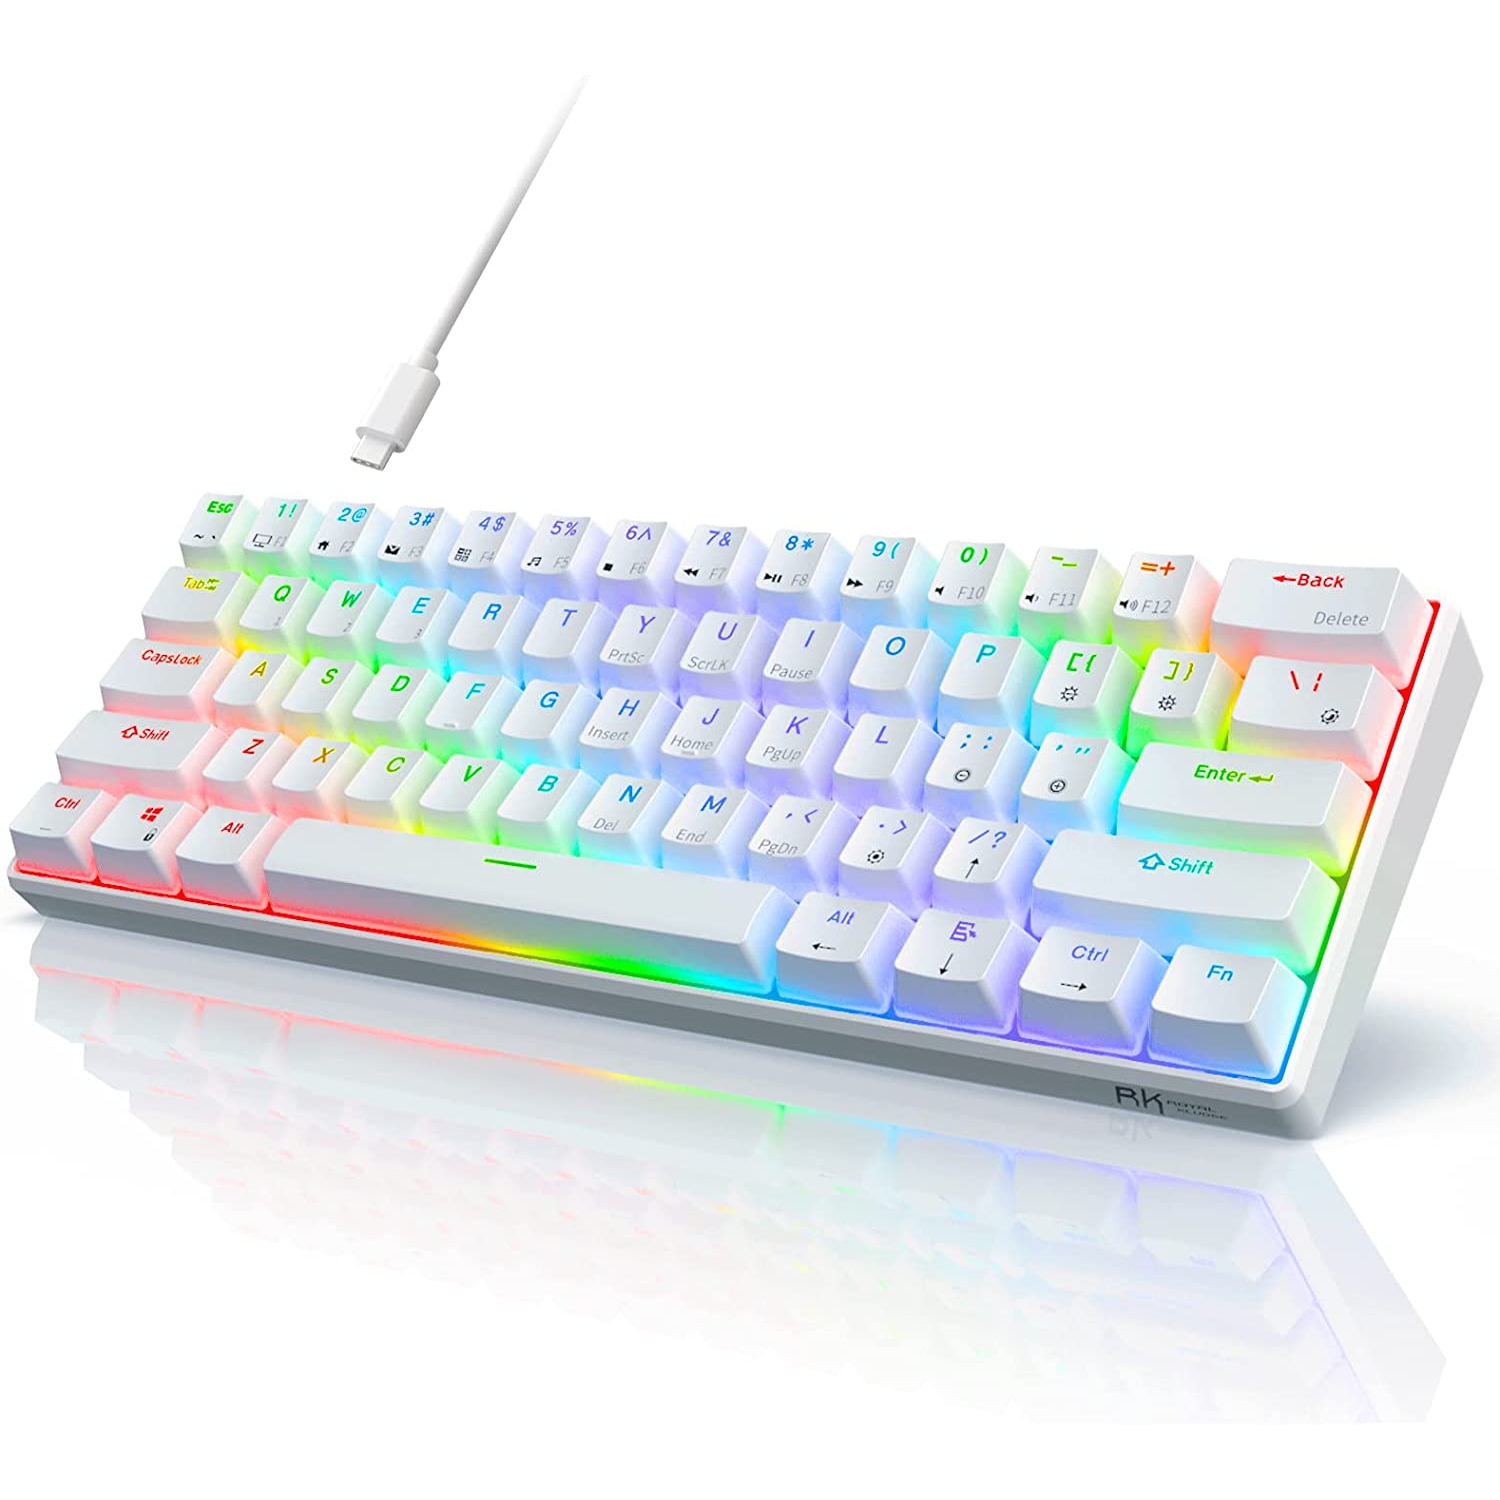 RK ROYAL KLUDGE RK61 Wired 60% Mechanical Gaming Keyboard RGB Backlit Ultra-Compact Red Switch White